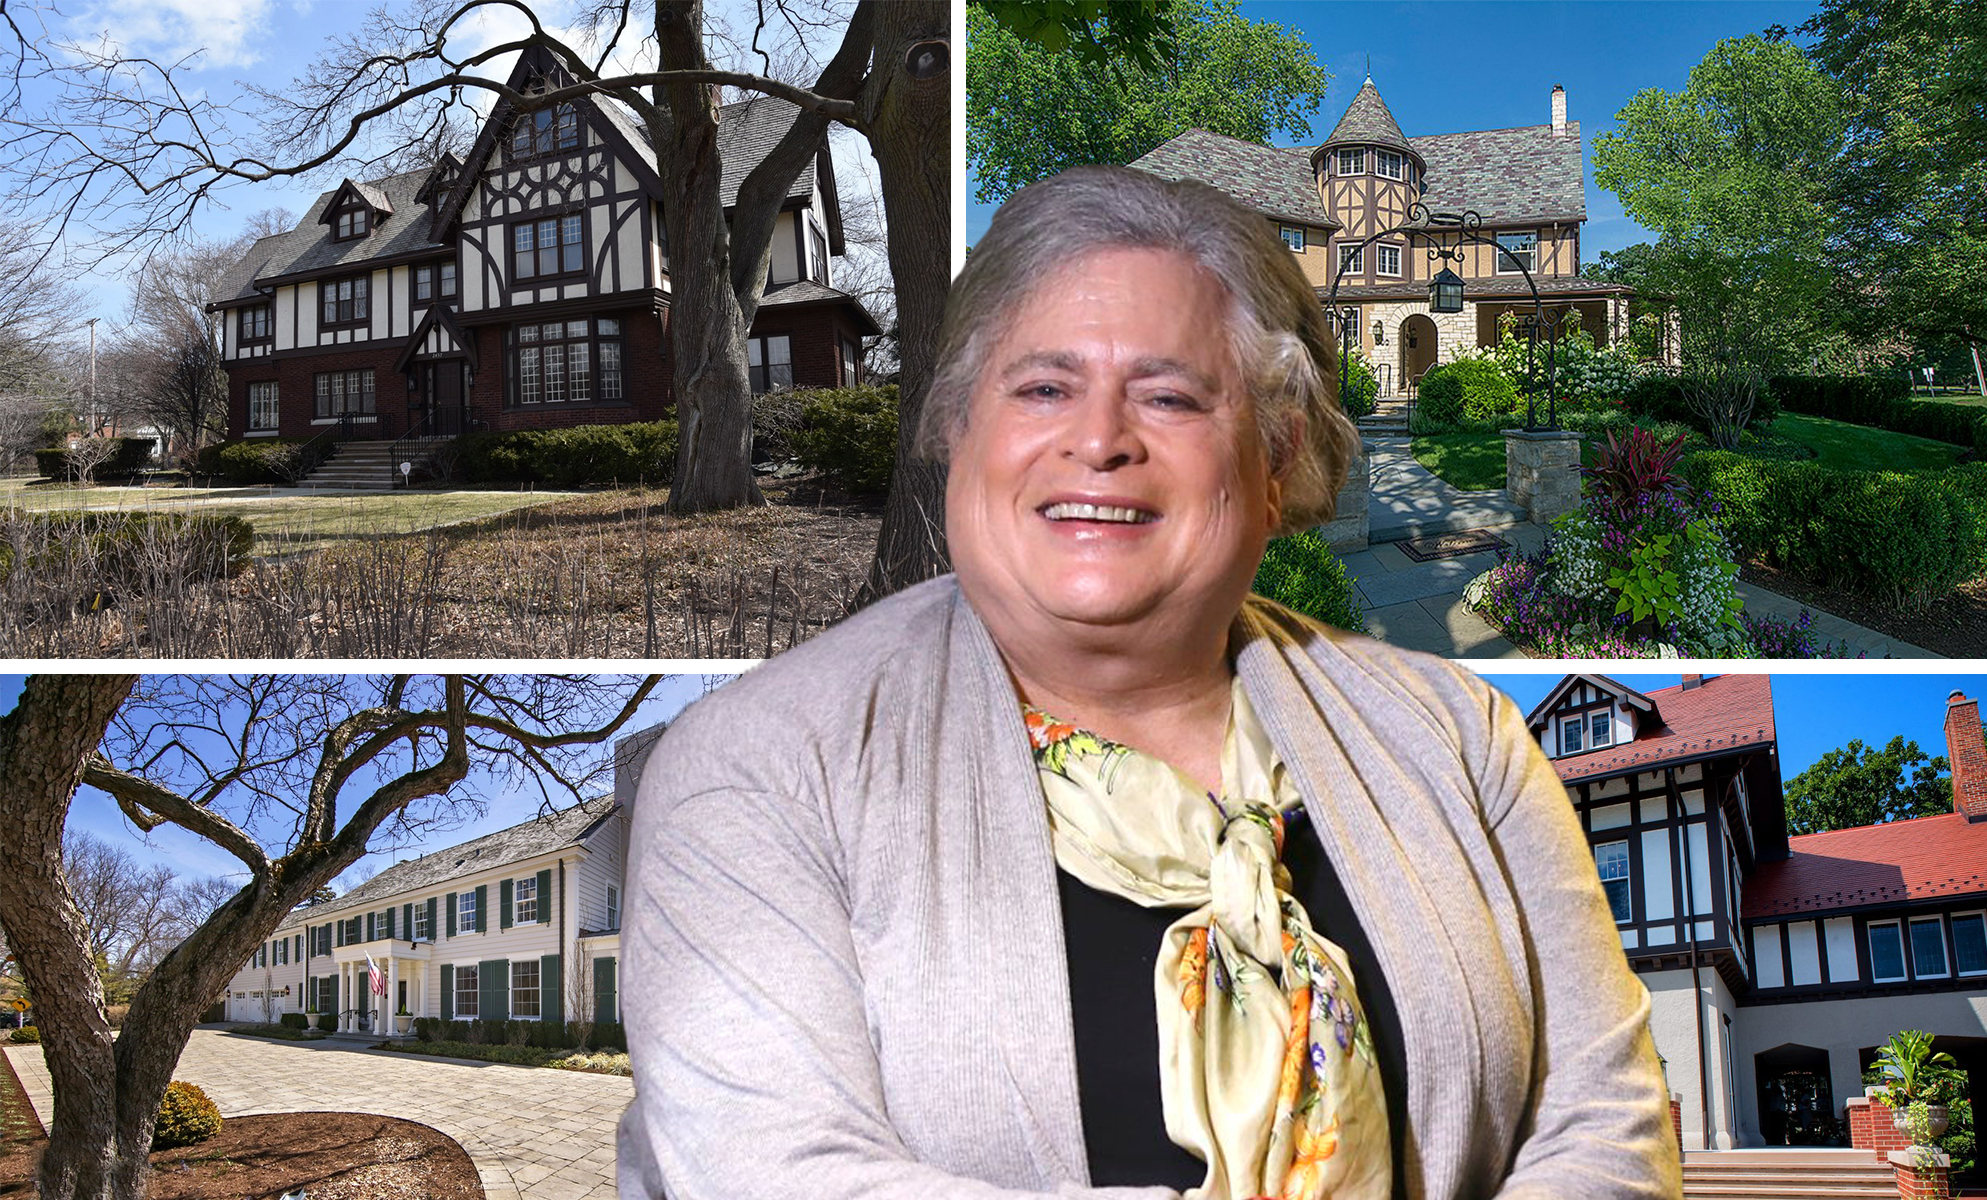 Col. Jennifer Pritzker is selling four North Shore mansions (Credit: Getty Images)